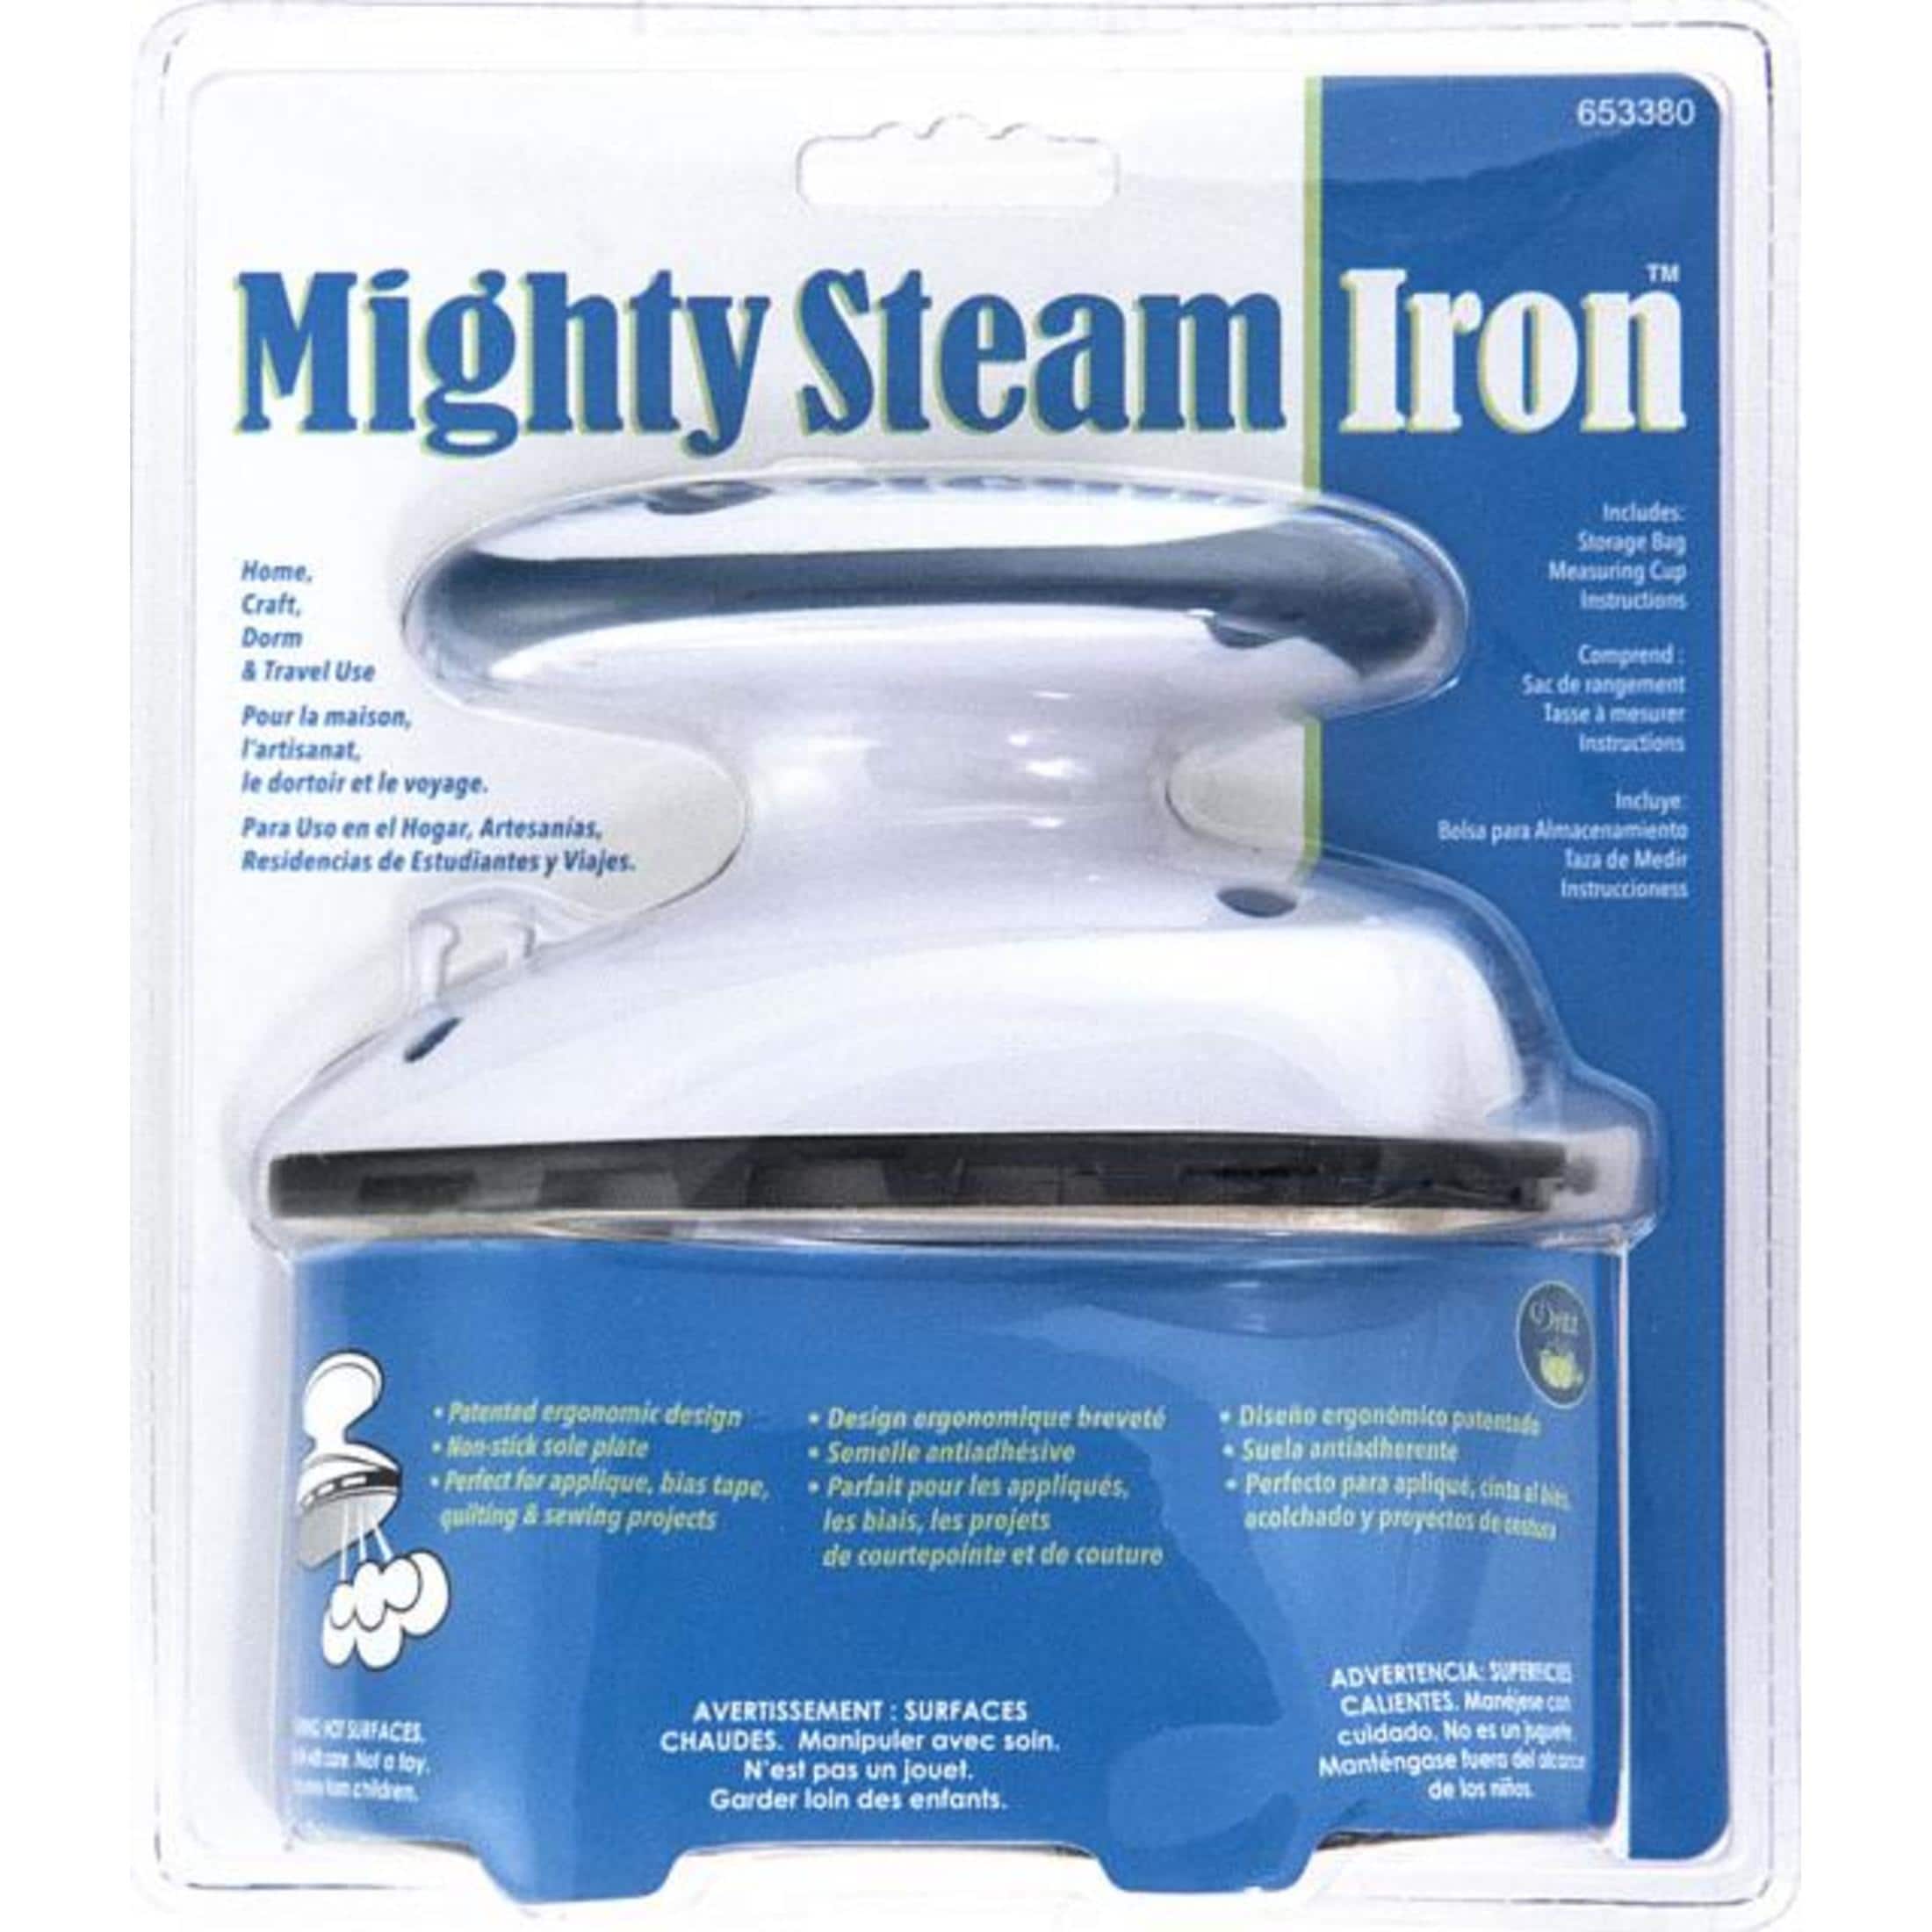 Innovative Home Creations Ironing Mat with Silicone Pad 19.5X28